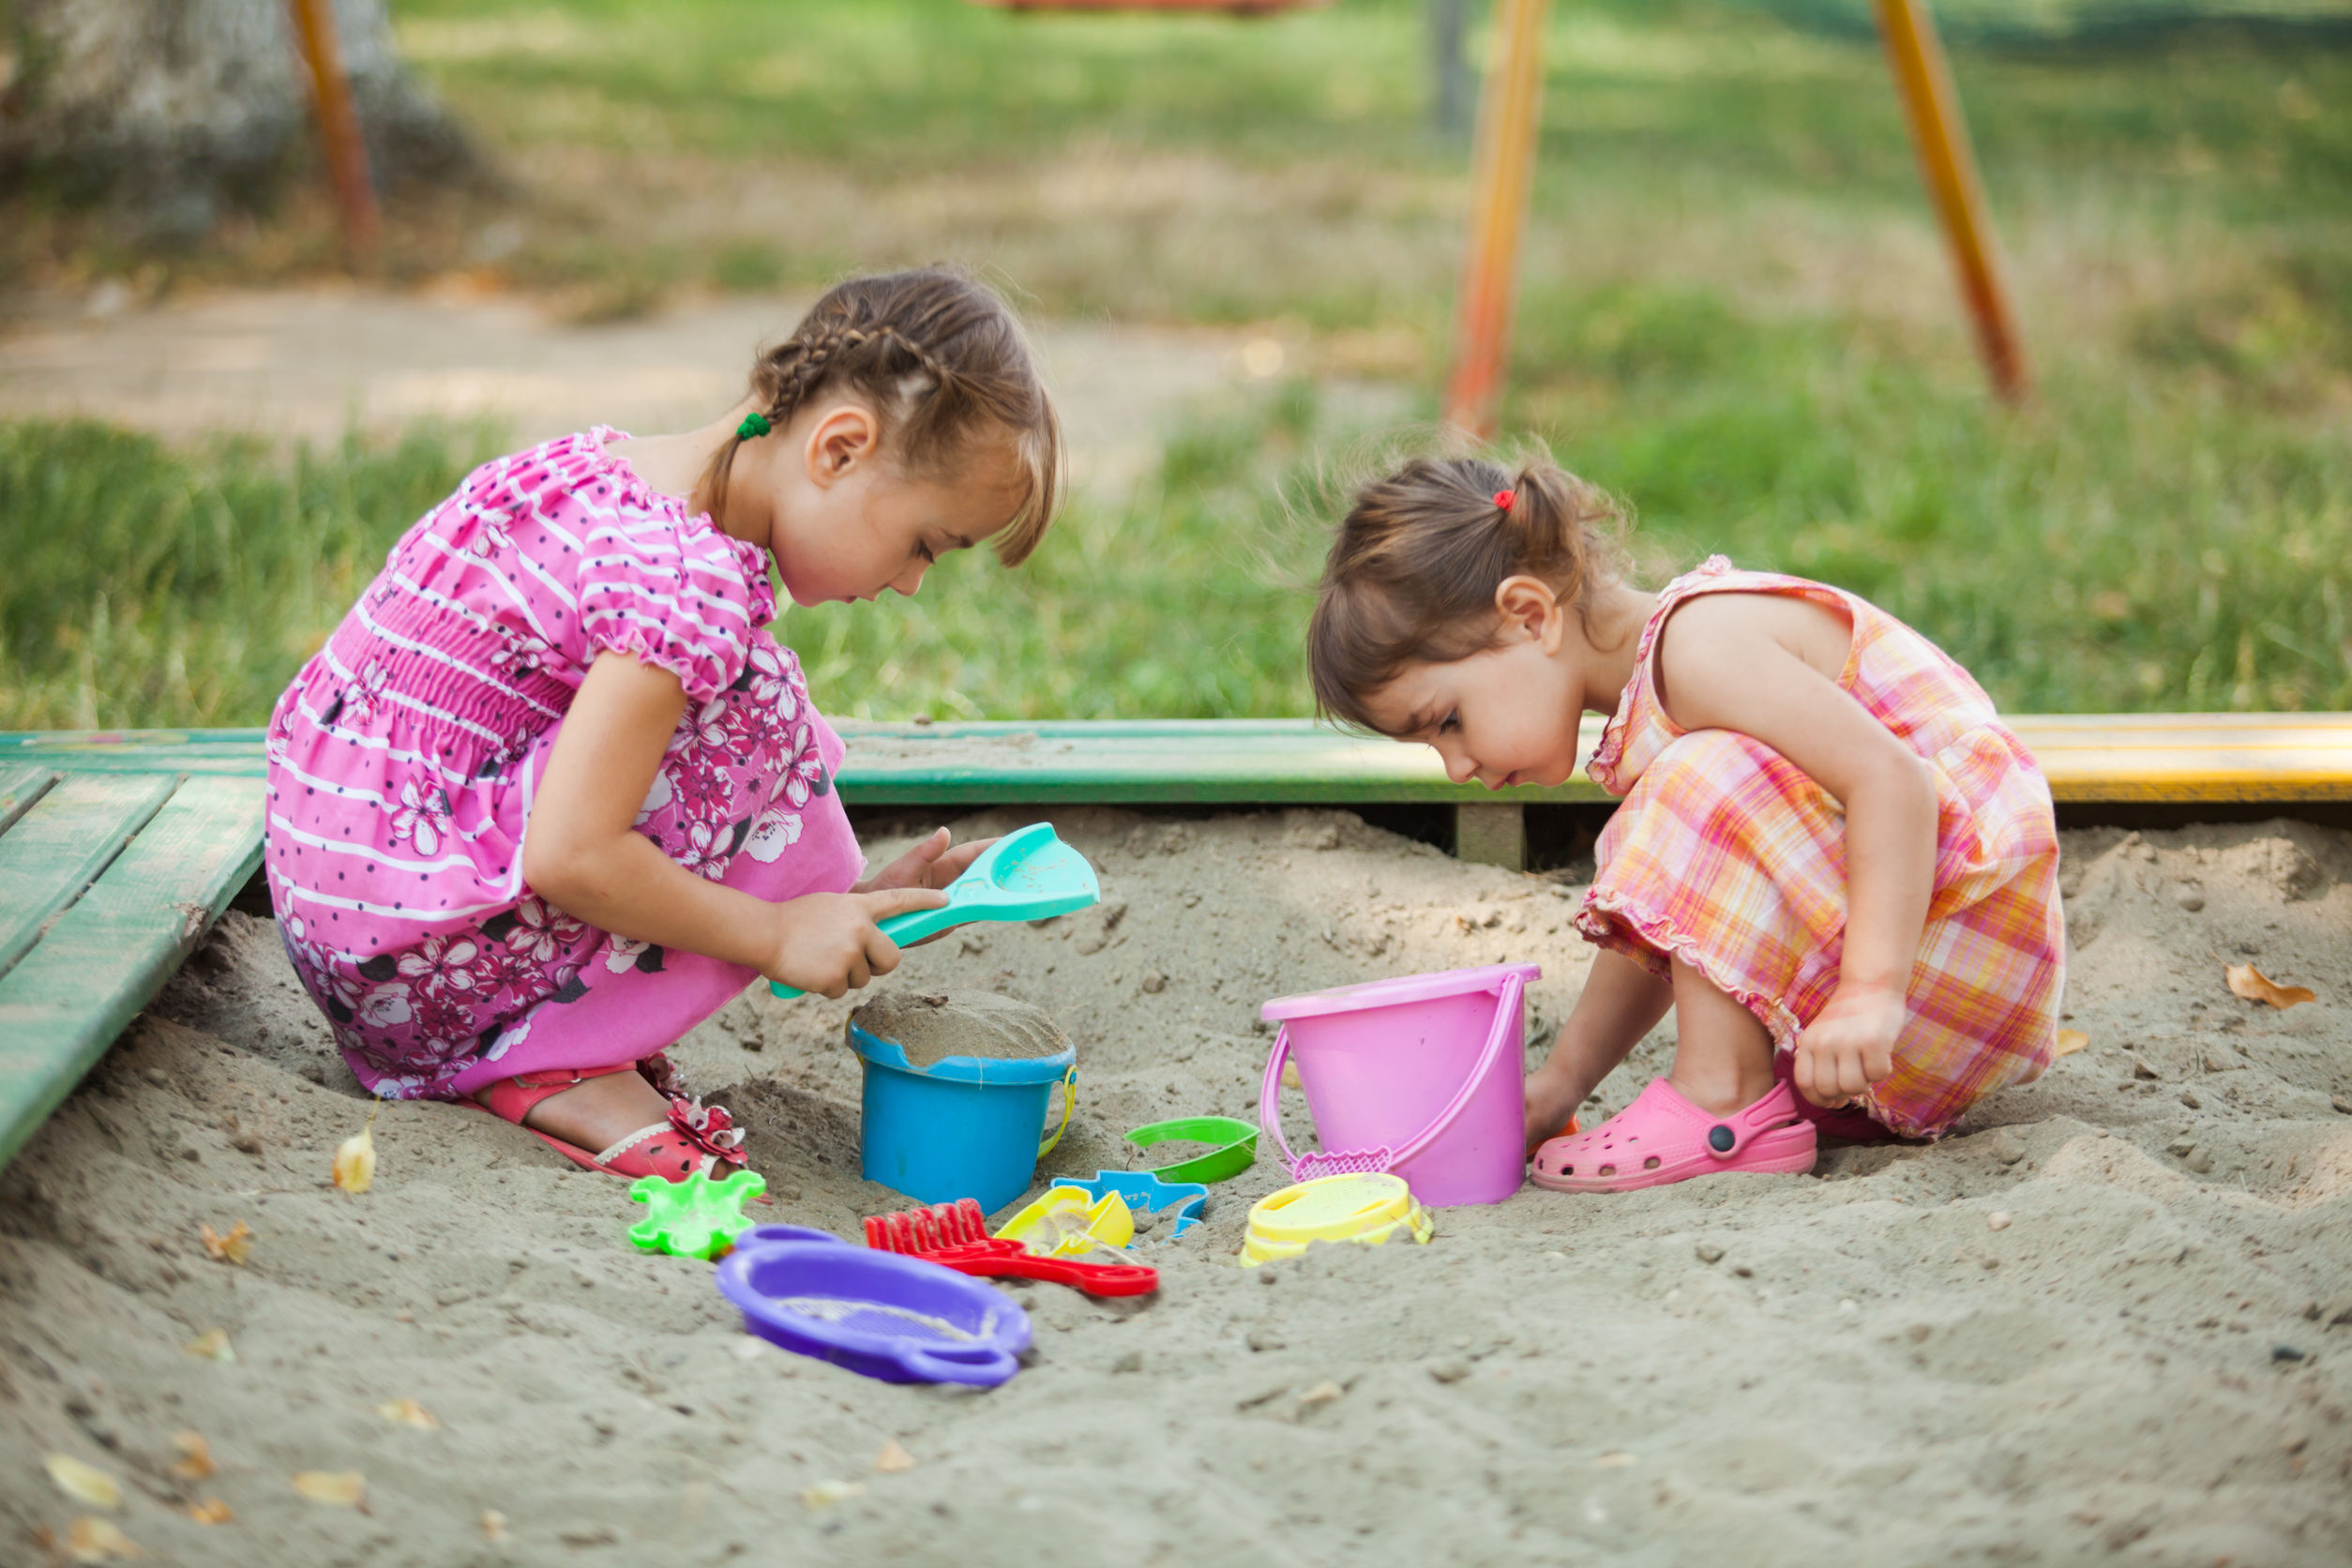 10 Easy Sand Play Ideas to try at home or daycare!